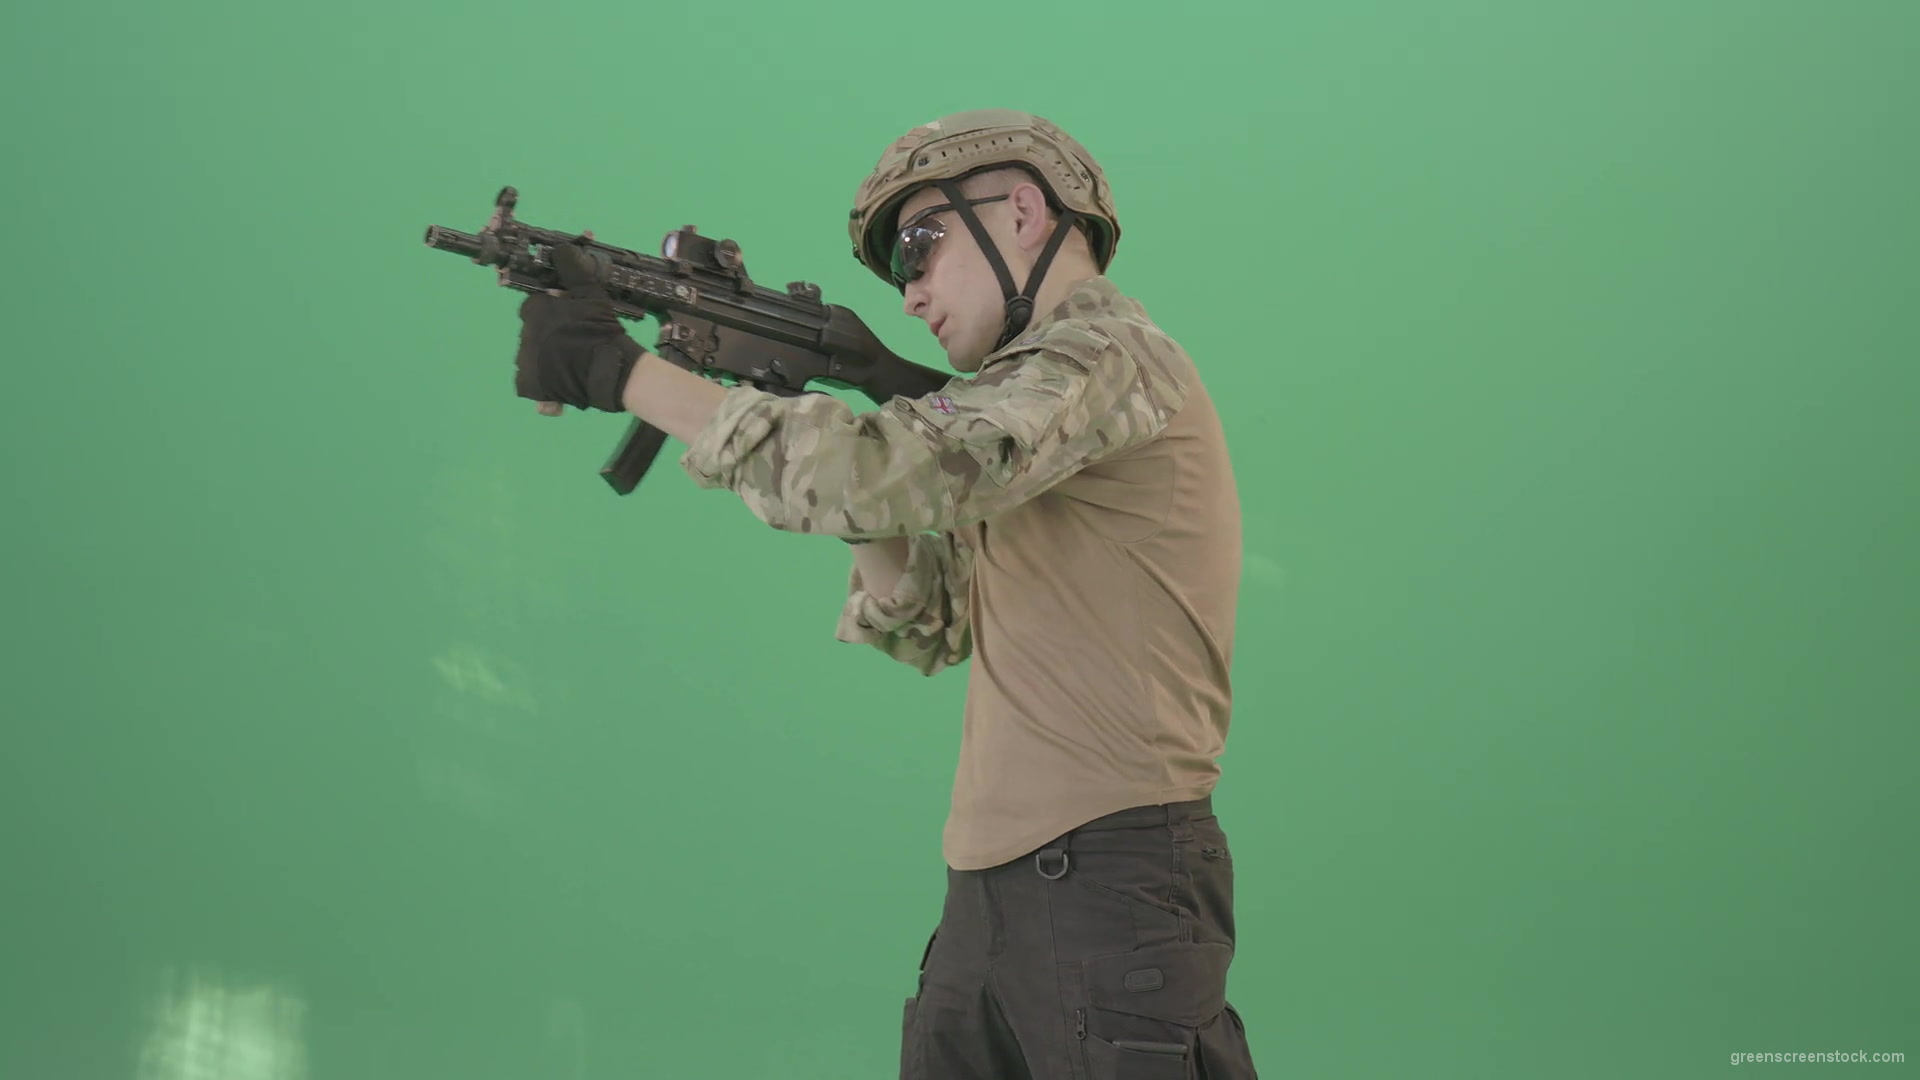 Soldier-in-army-uniform-shooting-with-gun-fire-machine-isolated-on-green-screen-4K-Video-Footage-1920_002 Green Screen Stock